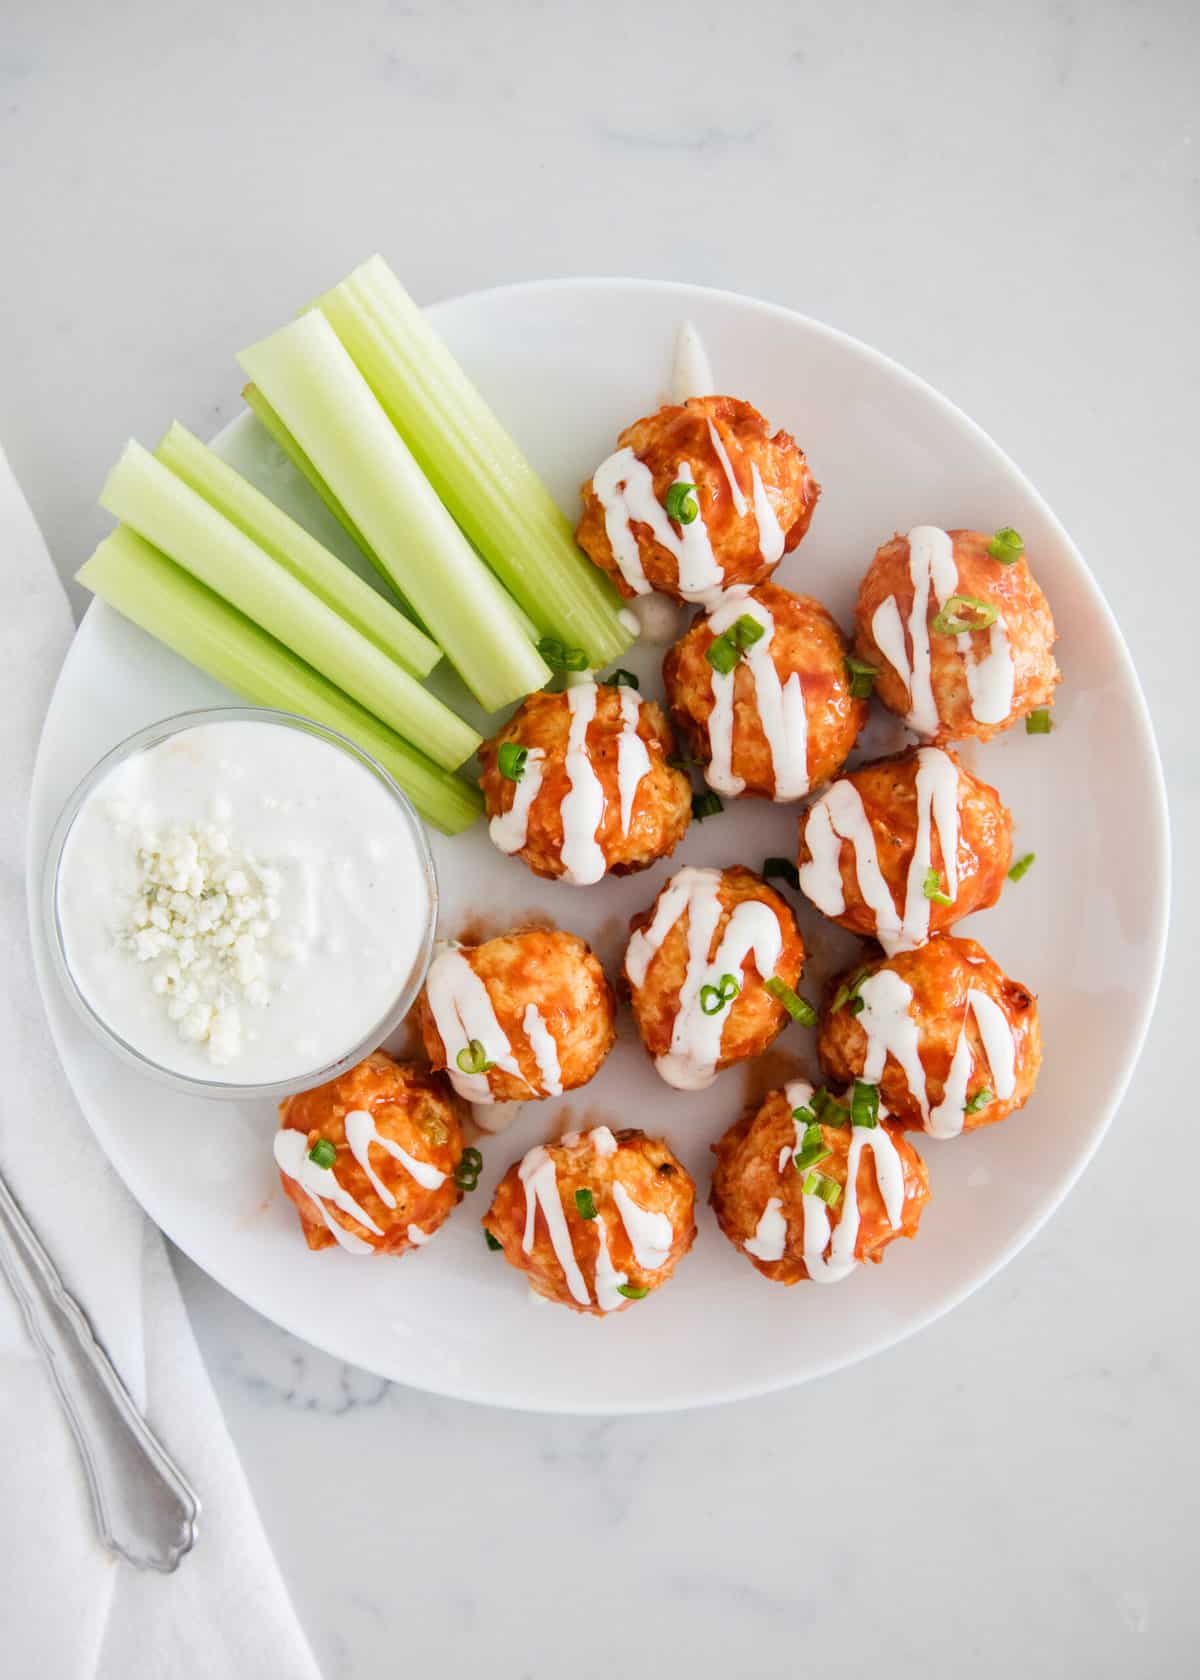 Buffalo chicken meatballs with blue cheese.